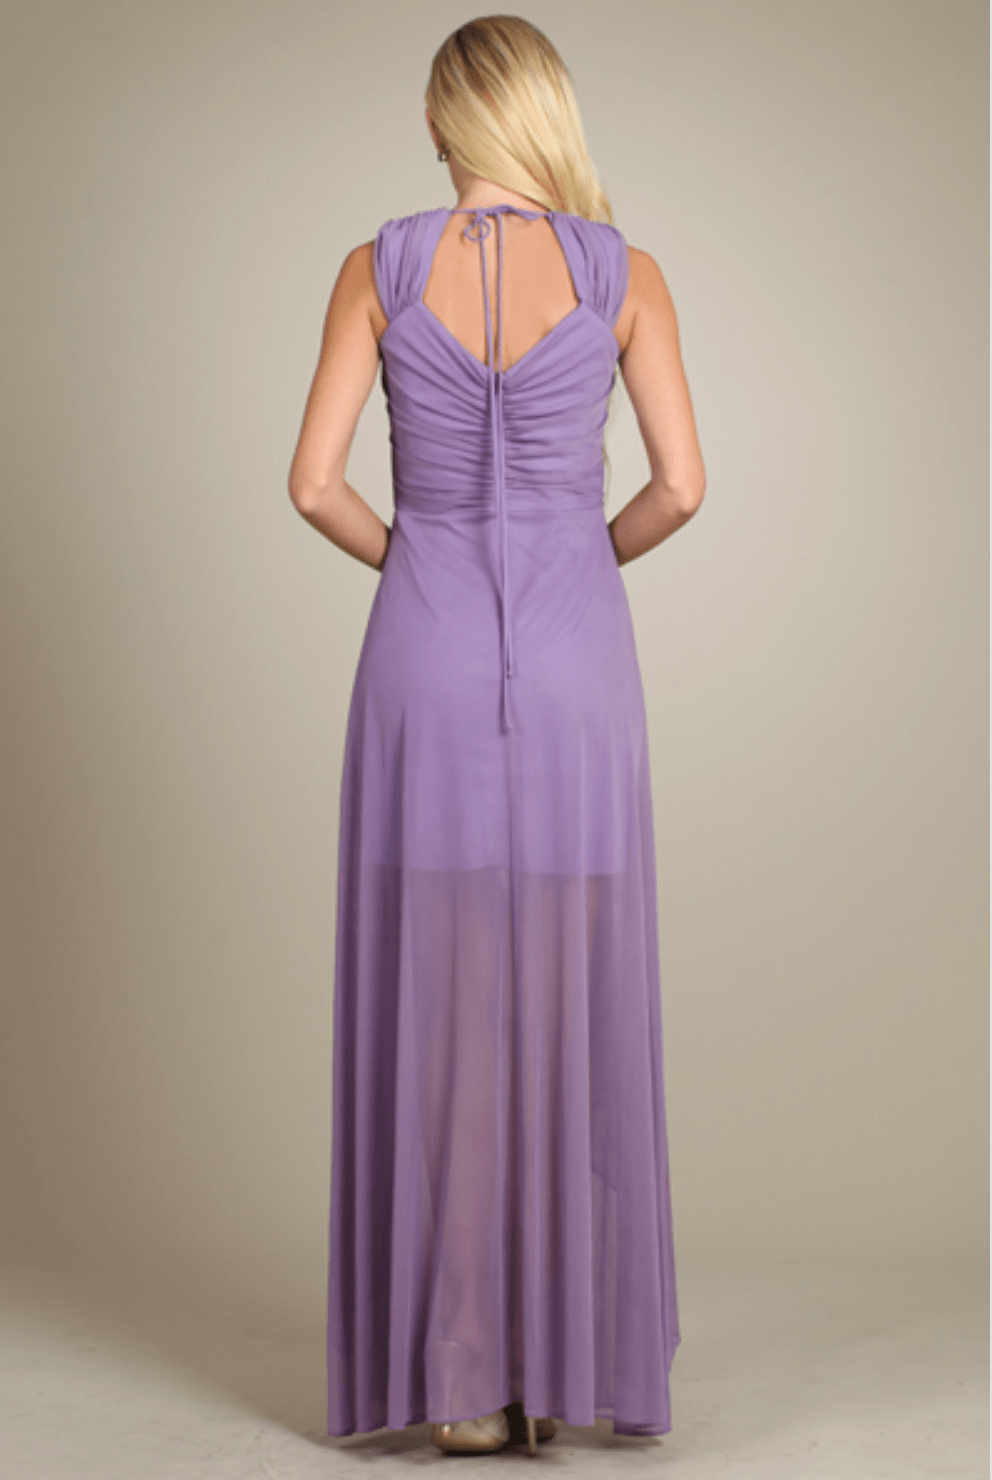 Chiffon Cowl Neck Dress by Fiesta | 3 Colors - NORMA REED